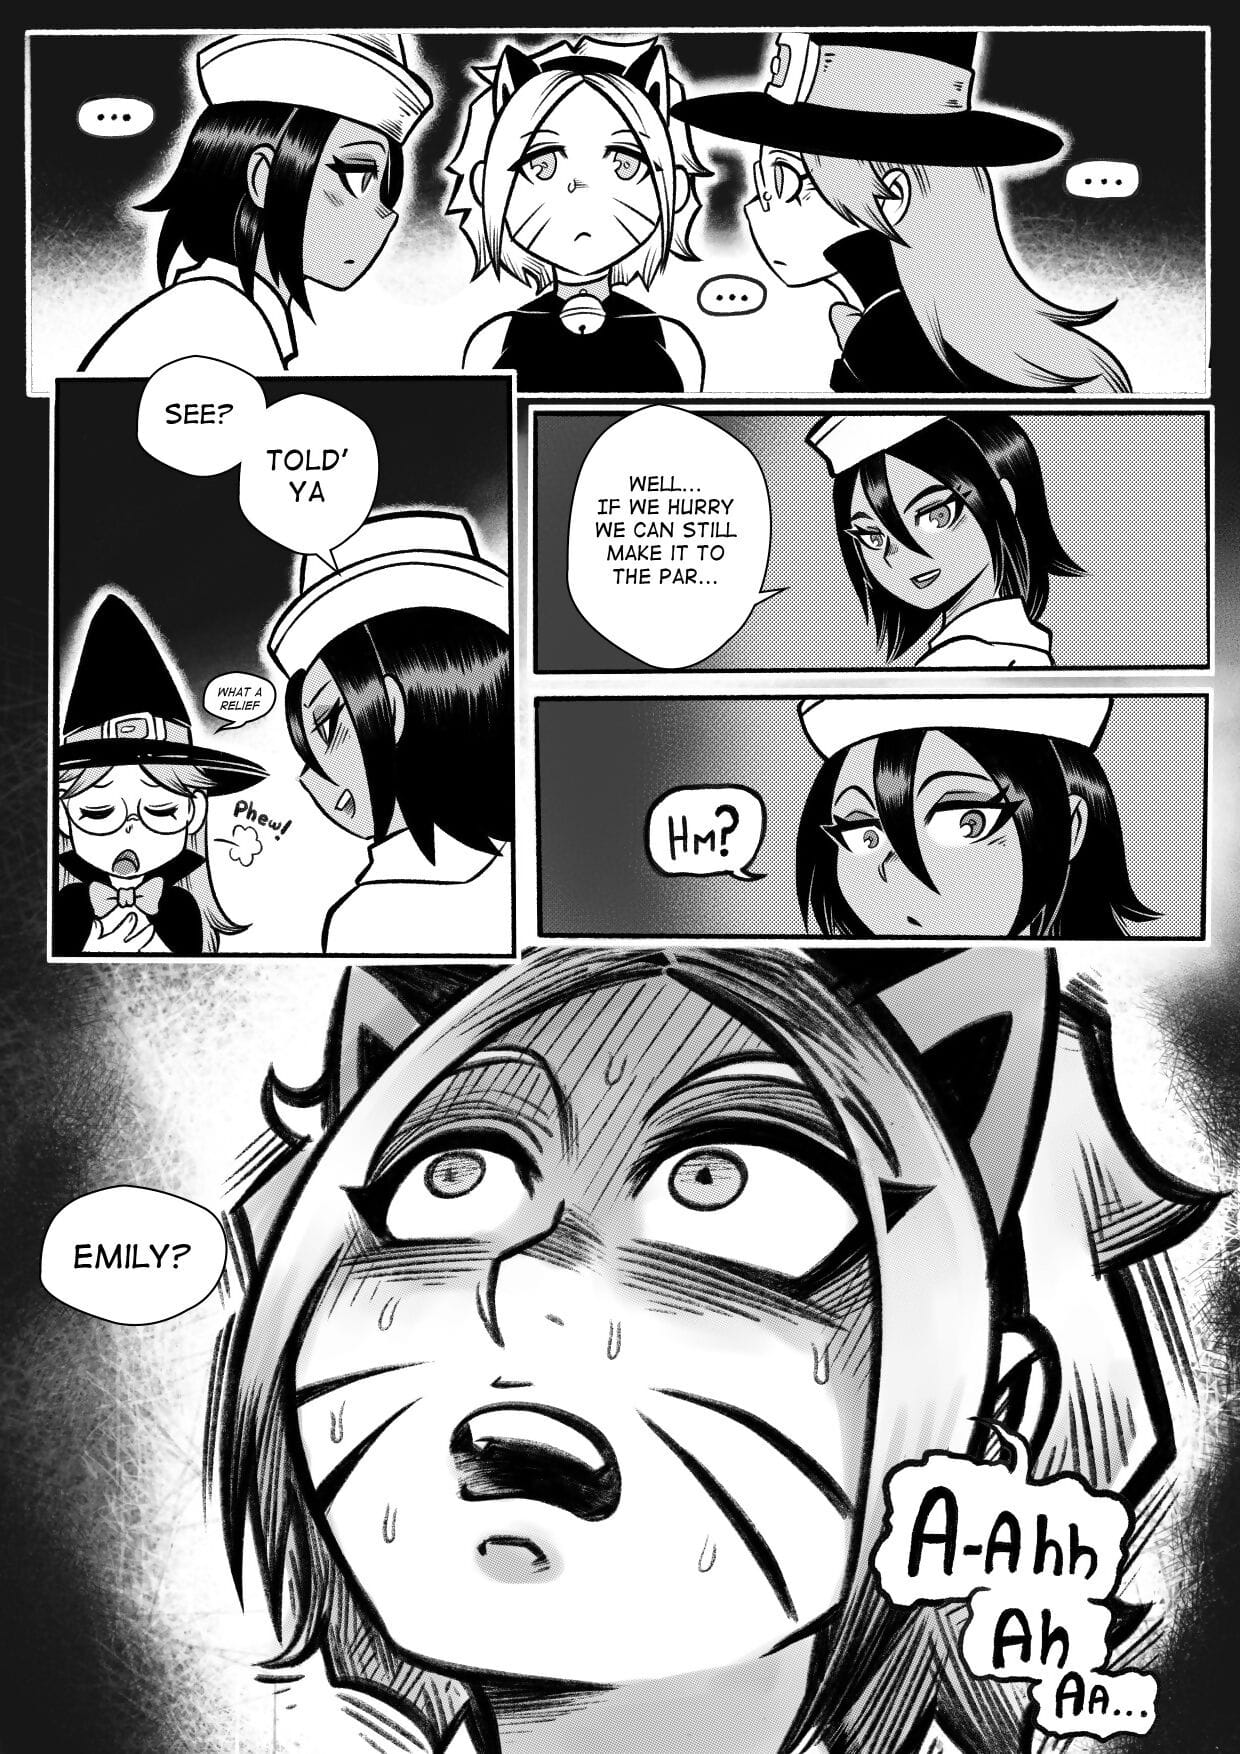 Hereafter - Halloween page 1